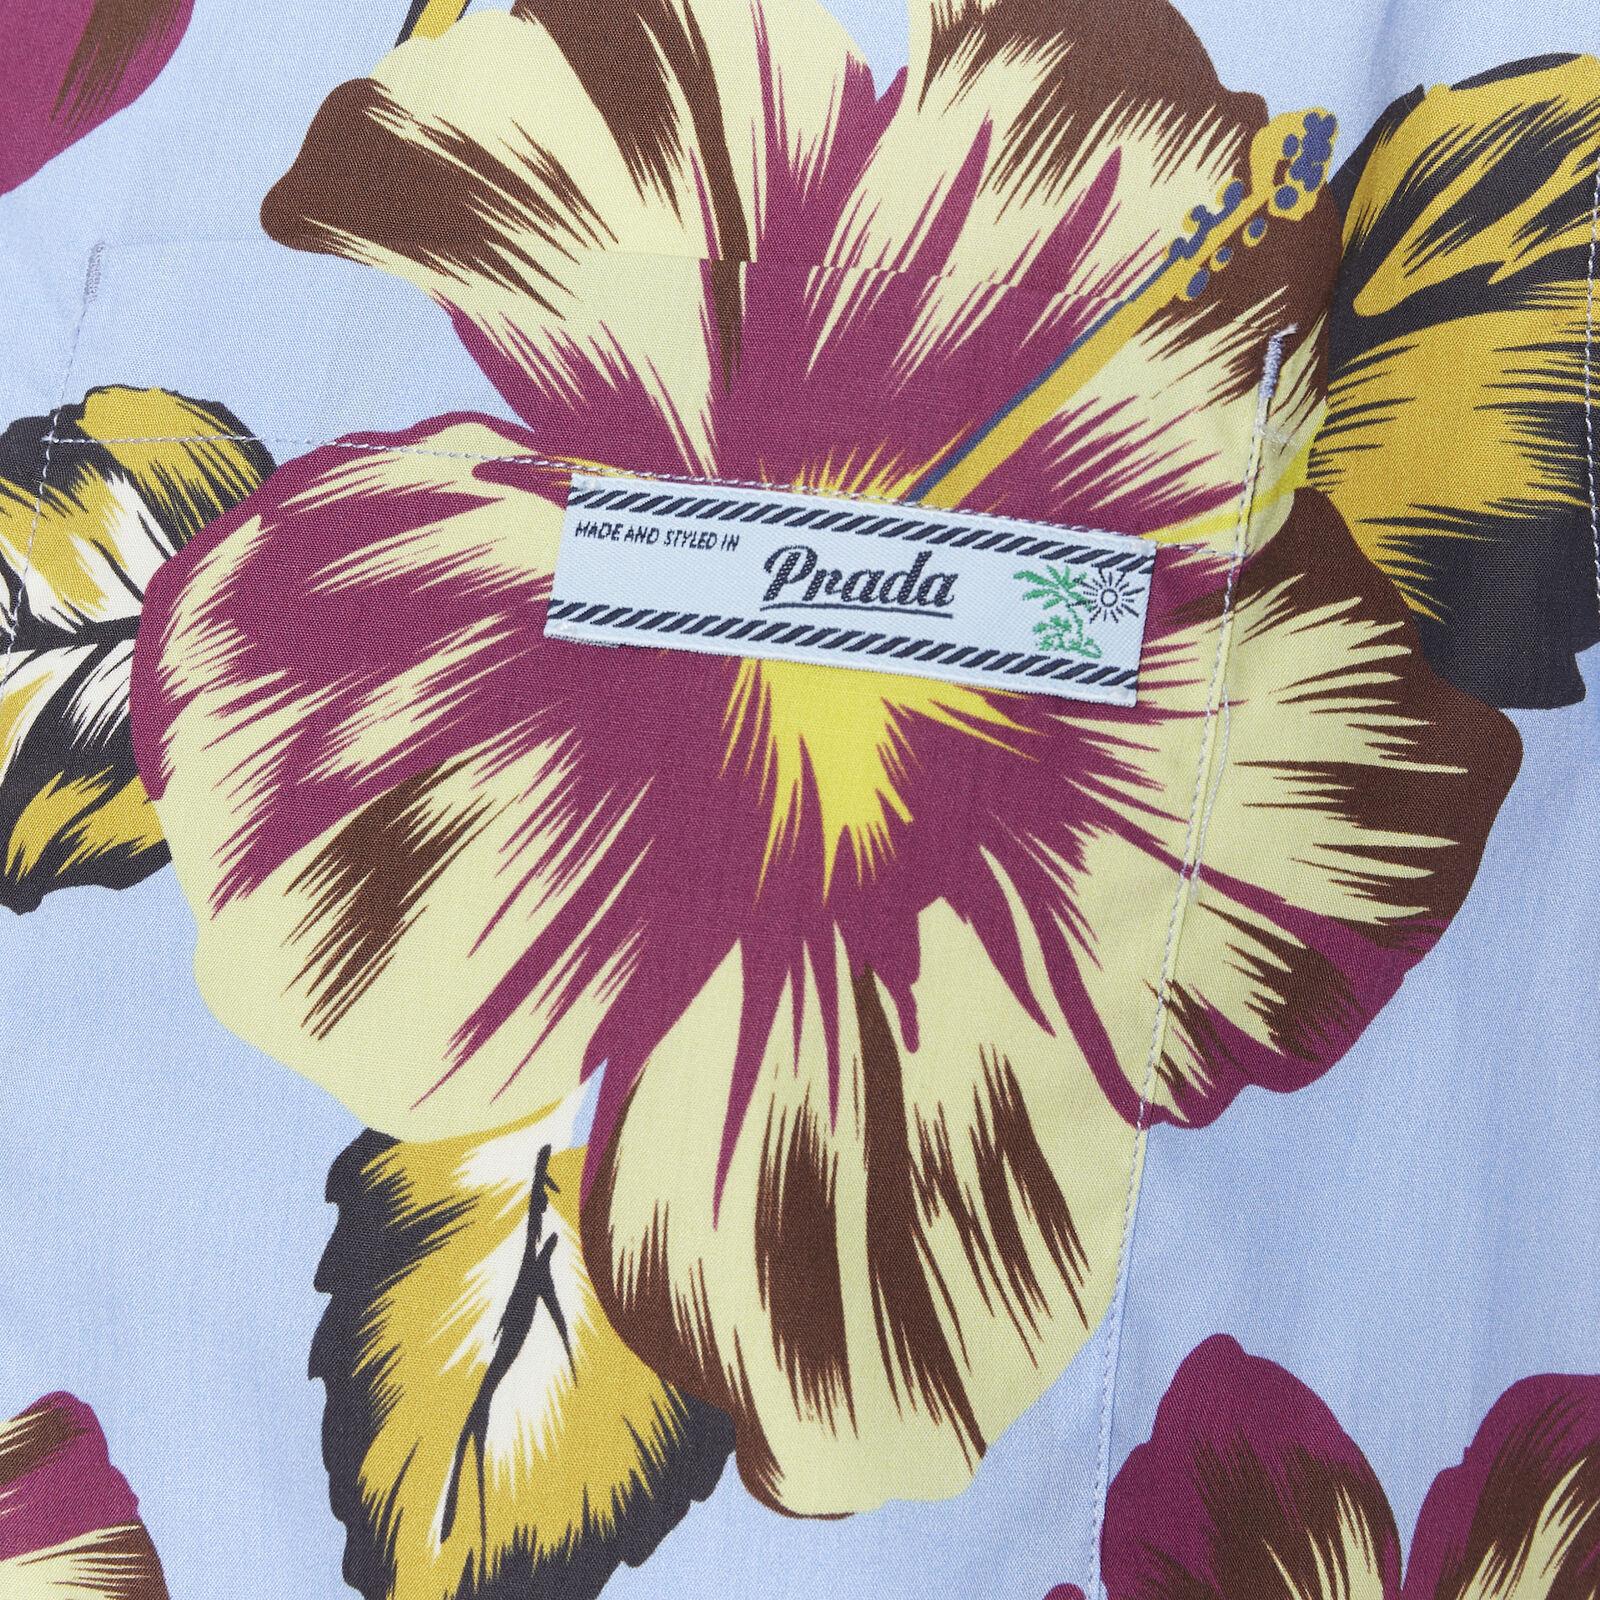 new PRADA 2019 Hibiscus floral print short sleeve Hawaiian bowling camp shirt M
Reference: TGAS/A05859
Brand: Prada
Designer: Miuccia Prada
Collection: Spring Summer 2019
Material: Cotton
Color: Blue
Pattern: Floral
Closure: Button
Extra Details: